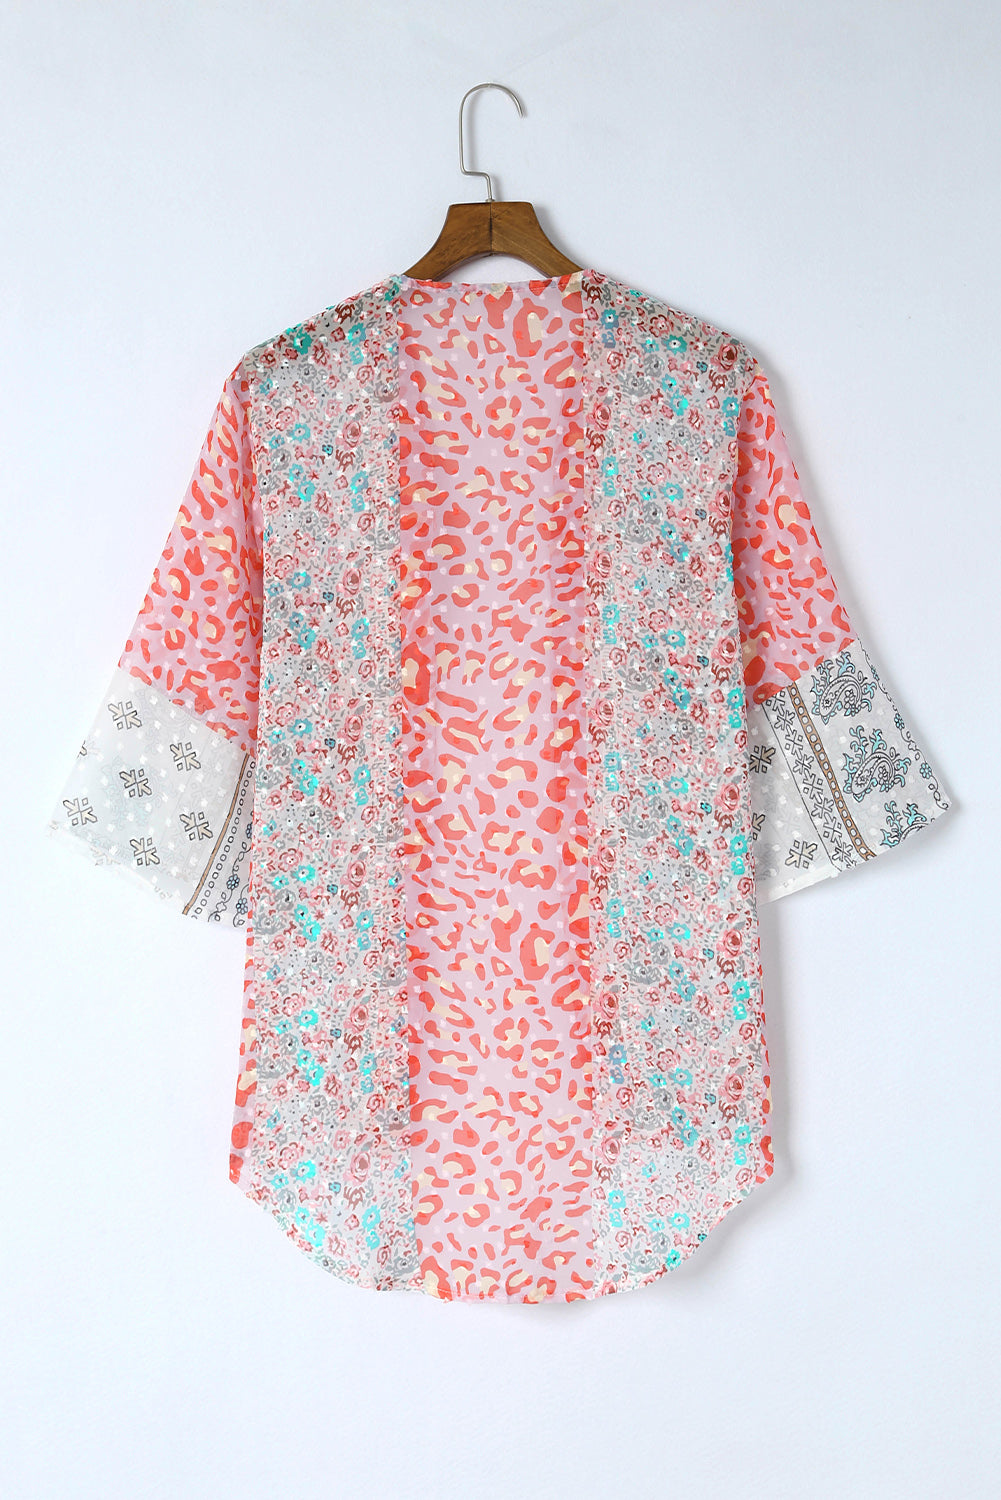 Swiss Dot Printed Open Front Cover Up - Thandynie